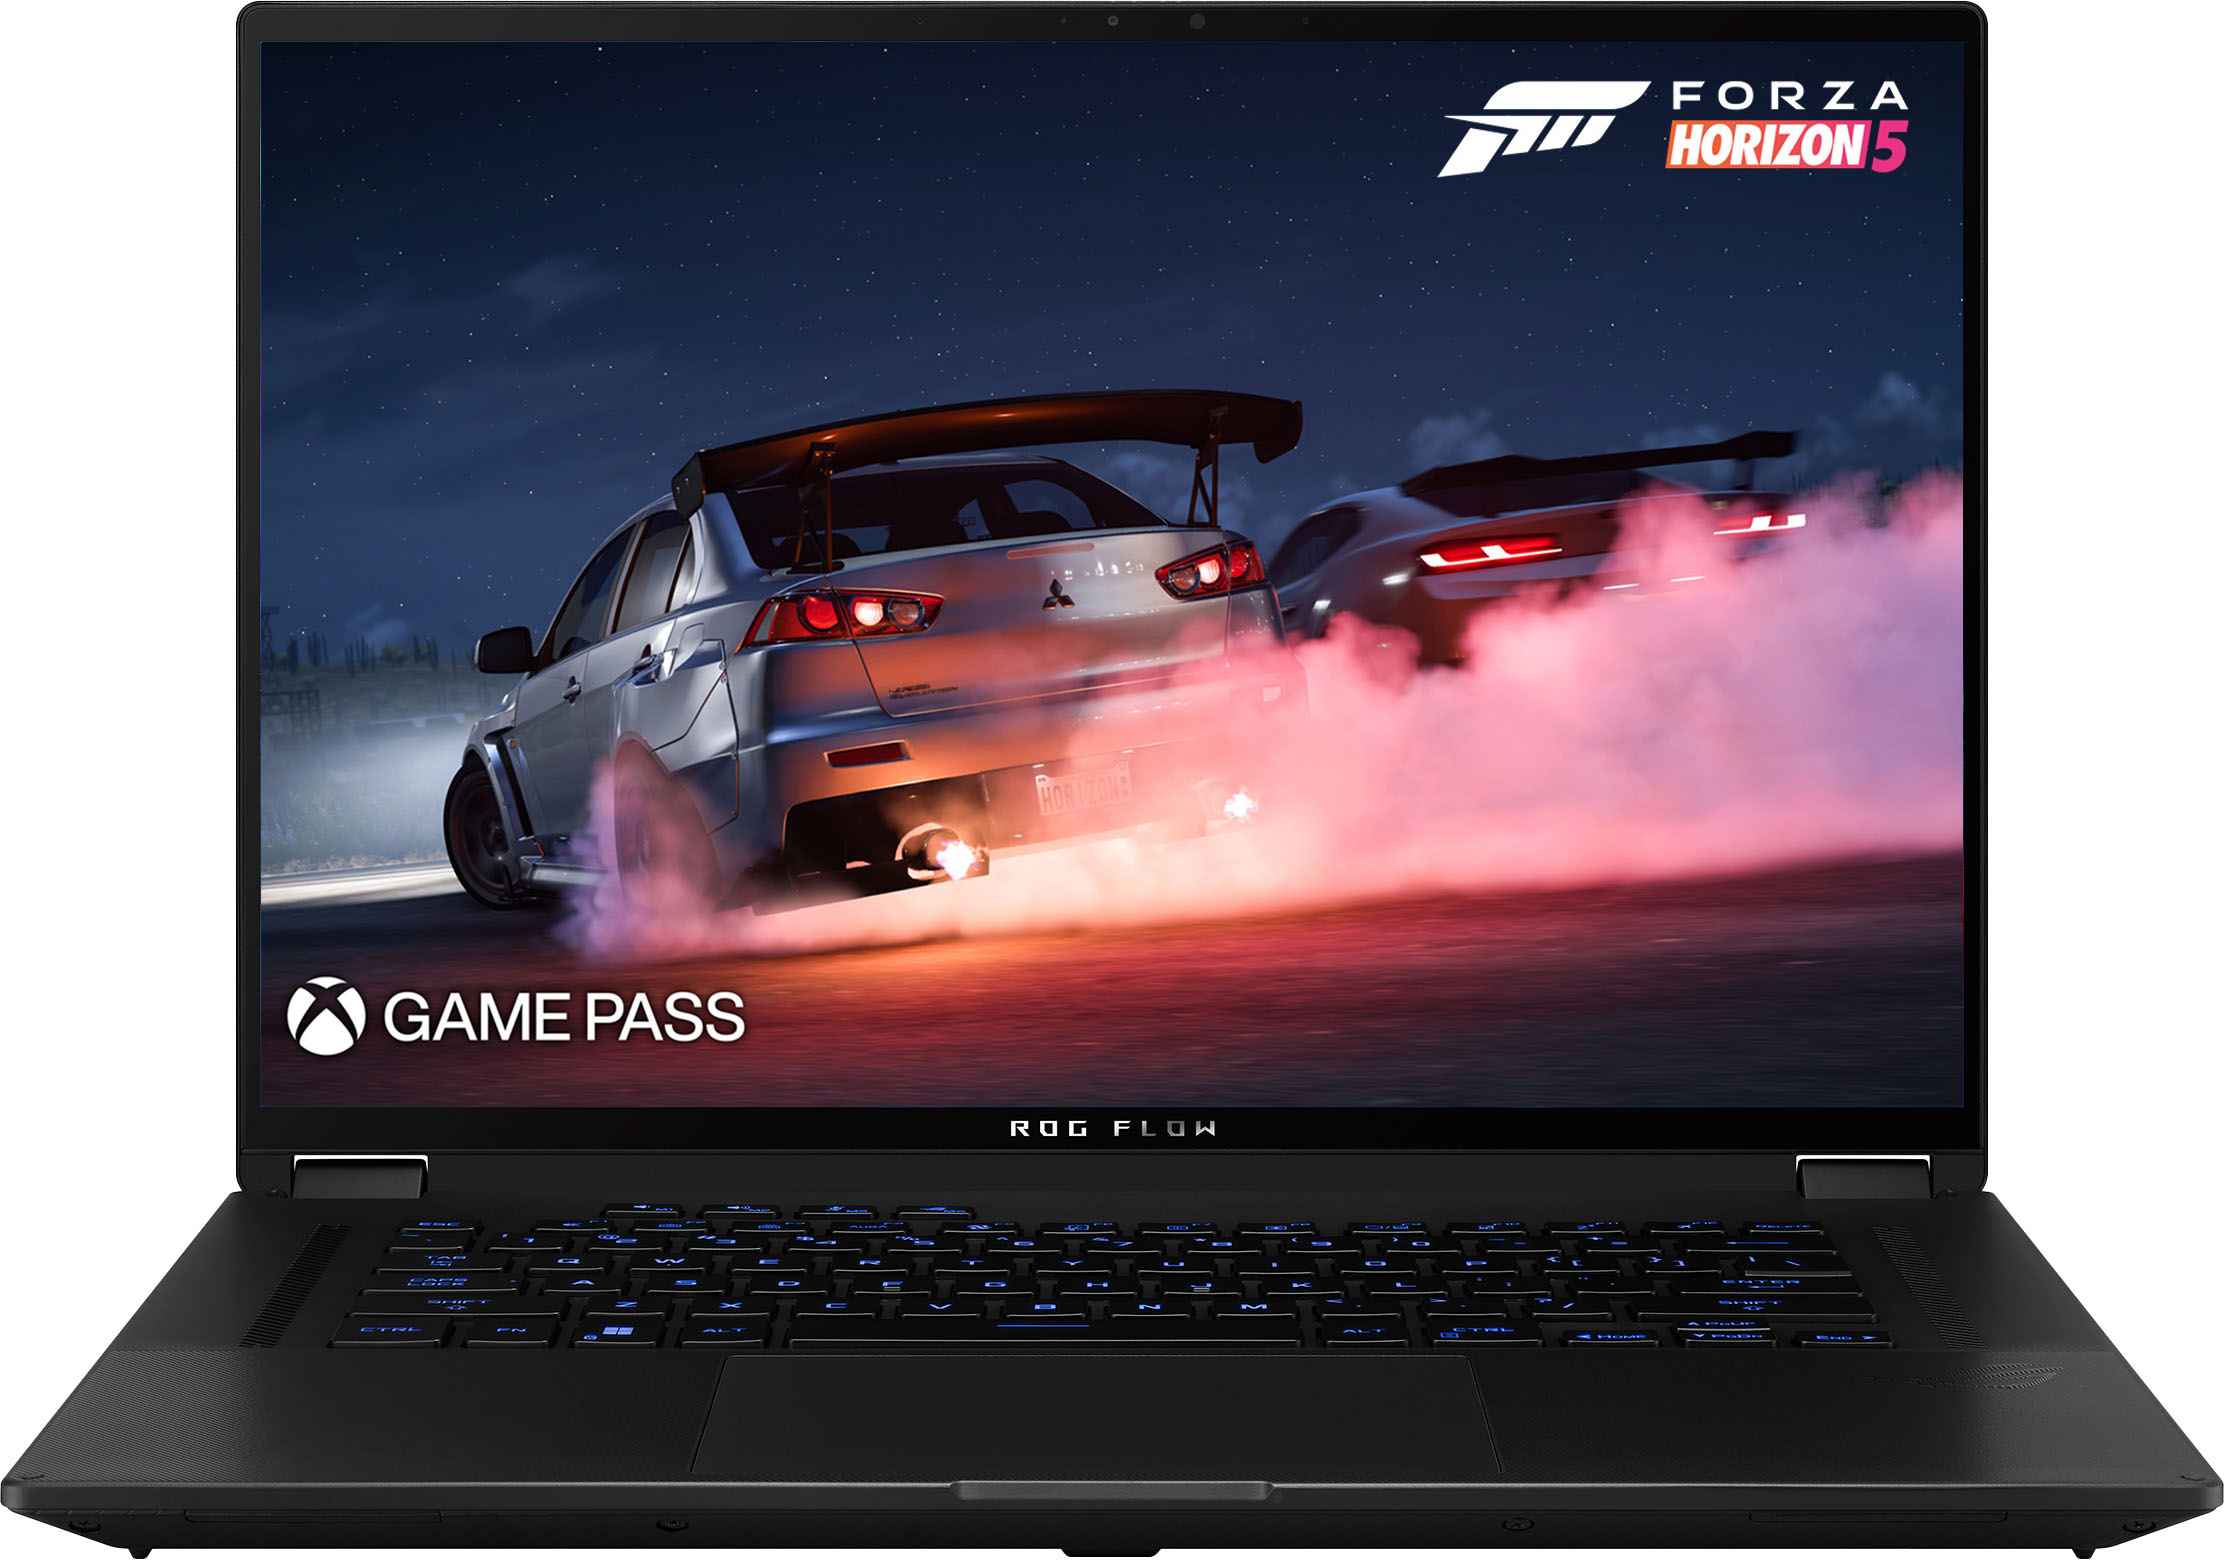 MSI Update Gaming Notebooks with NVIDIA GeForce GTX 900M Series